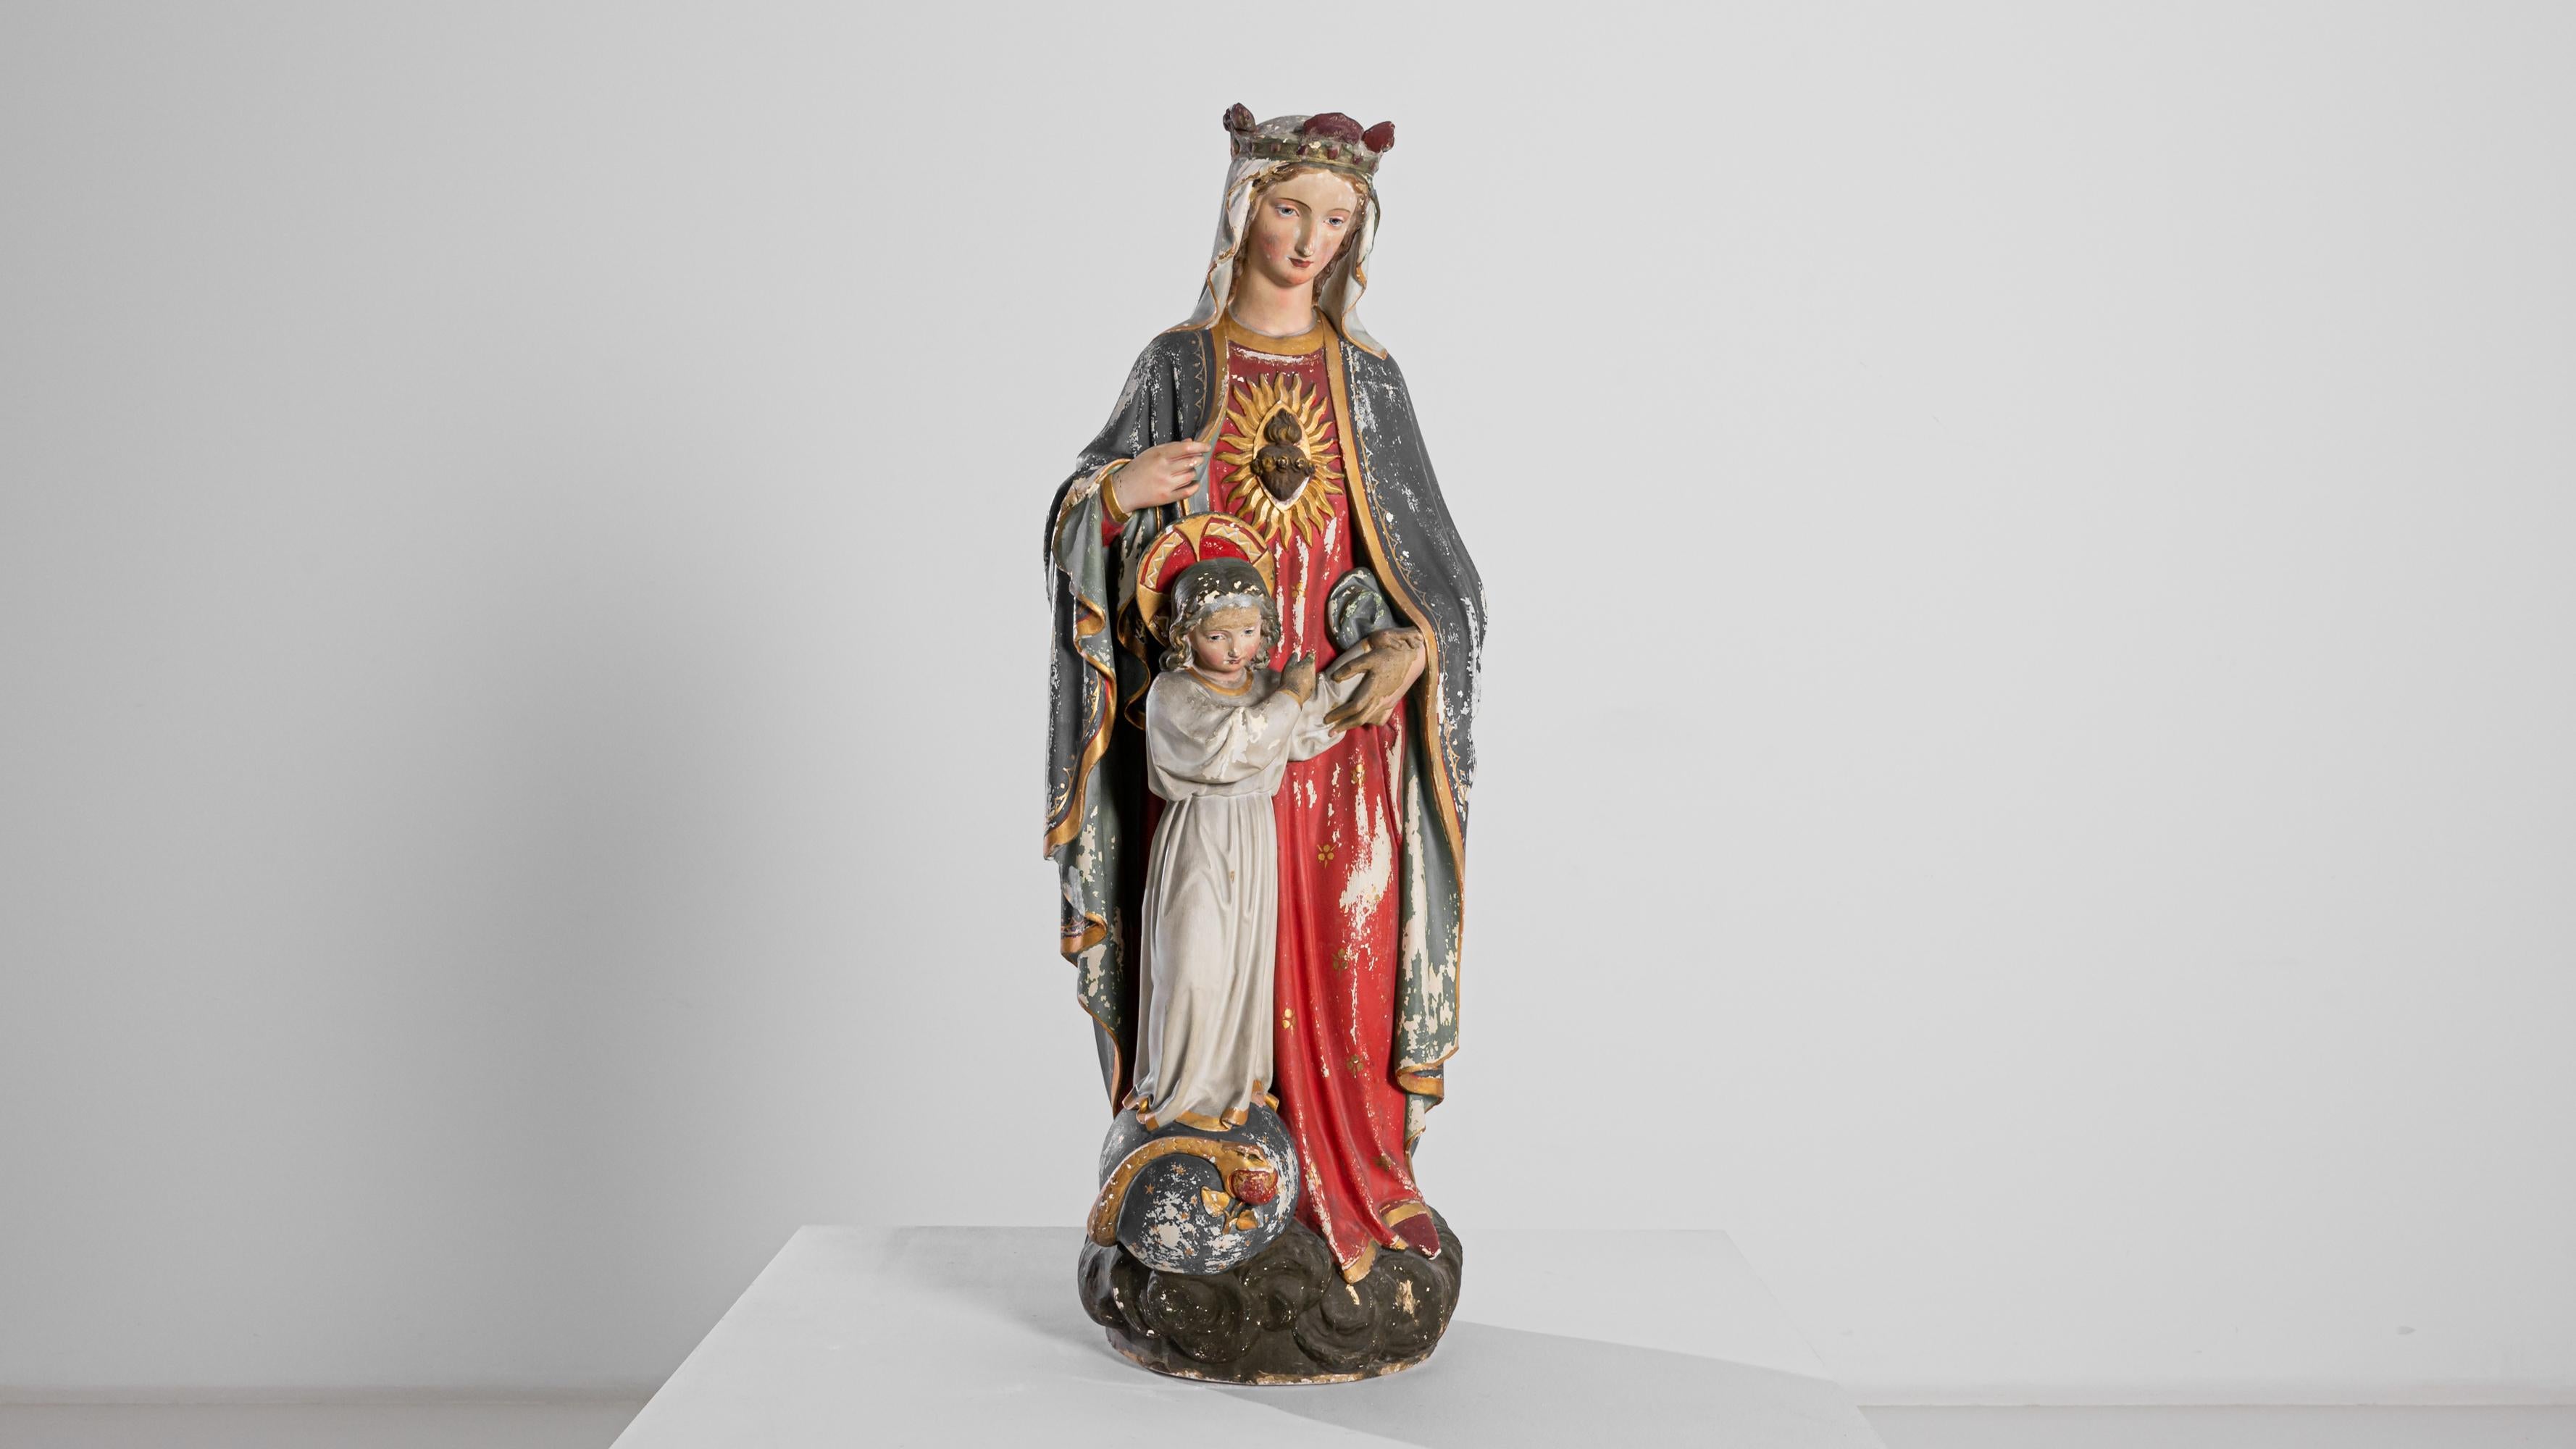 A ceramic liturgical sculpture from France, produced circa 1900. A three foot tall ceramic sculpture depicting the Virgin Mary standing alongside the Christ Child on a cosmos wrapped with a serpent holding the forbidden fruit in its mouth. A vibrant